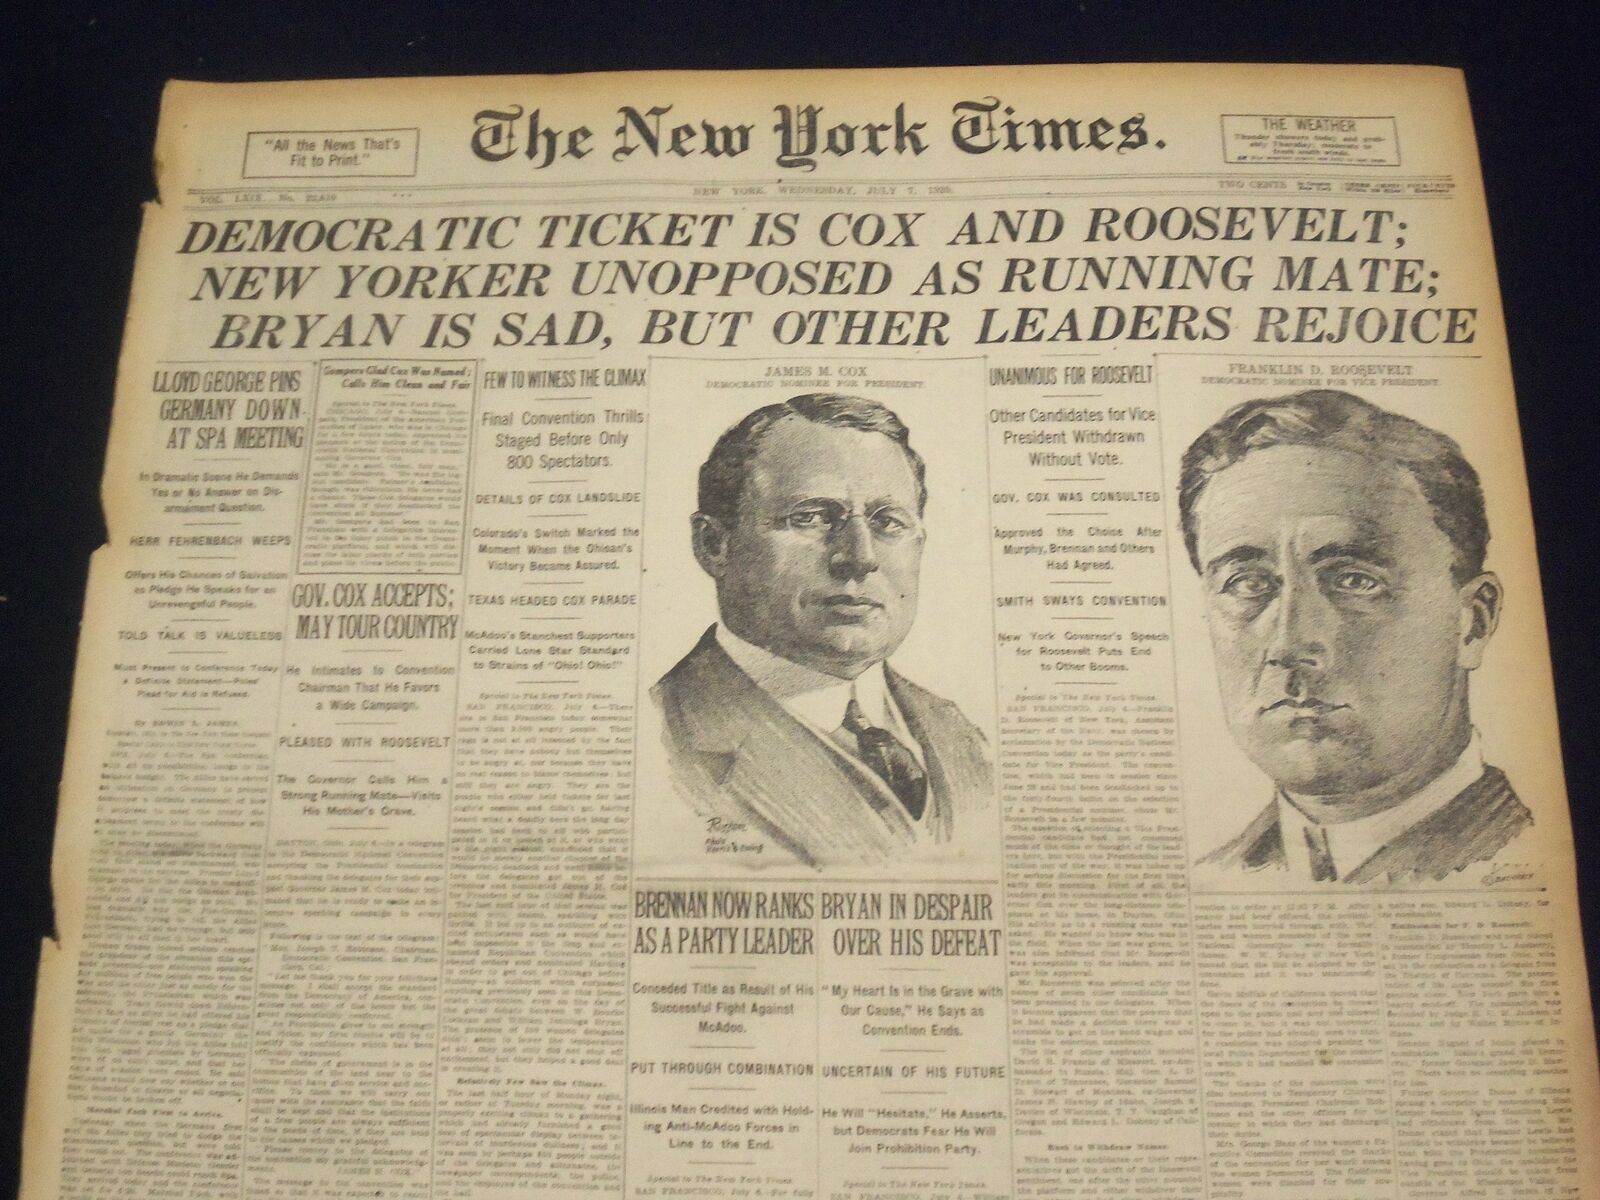 1920 JULY 7 NEW YORK TIMES - DEMOCRATIC TICKET IS COX AND ROOSEVELT - NT 9323